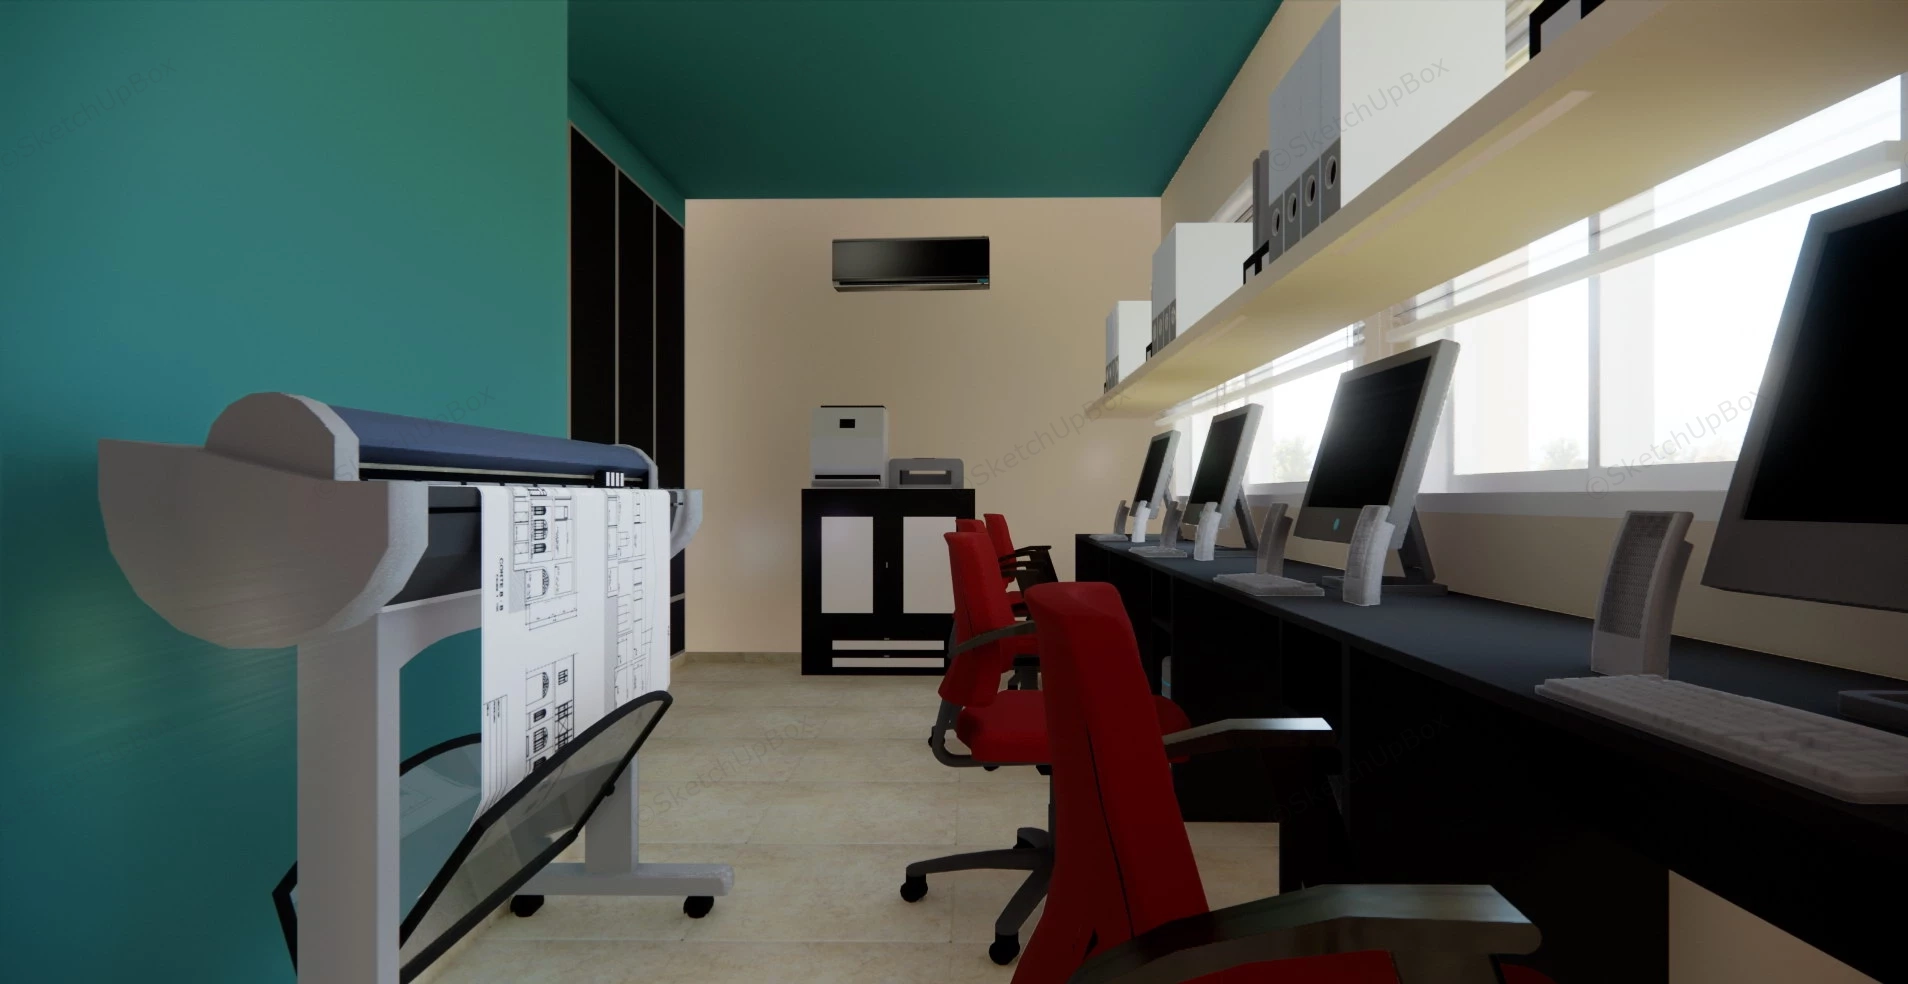 Architecture Office Interior Design sketchup model preview - SketchupBox